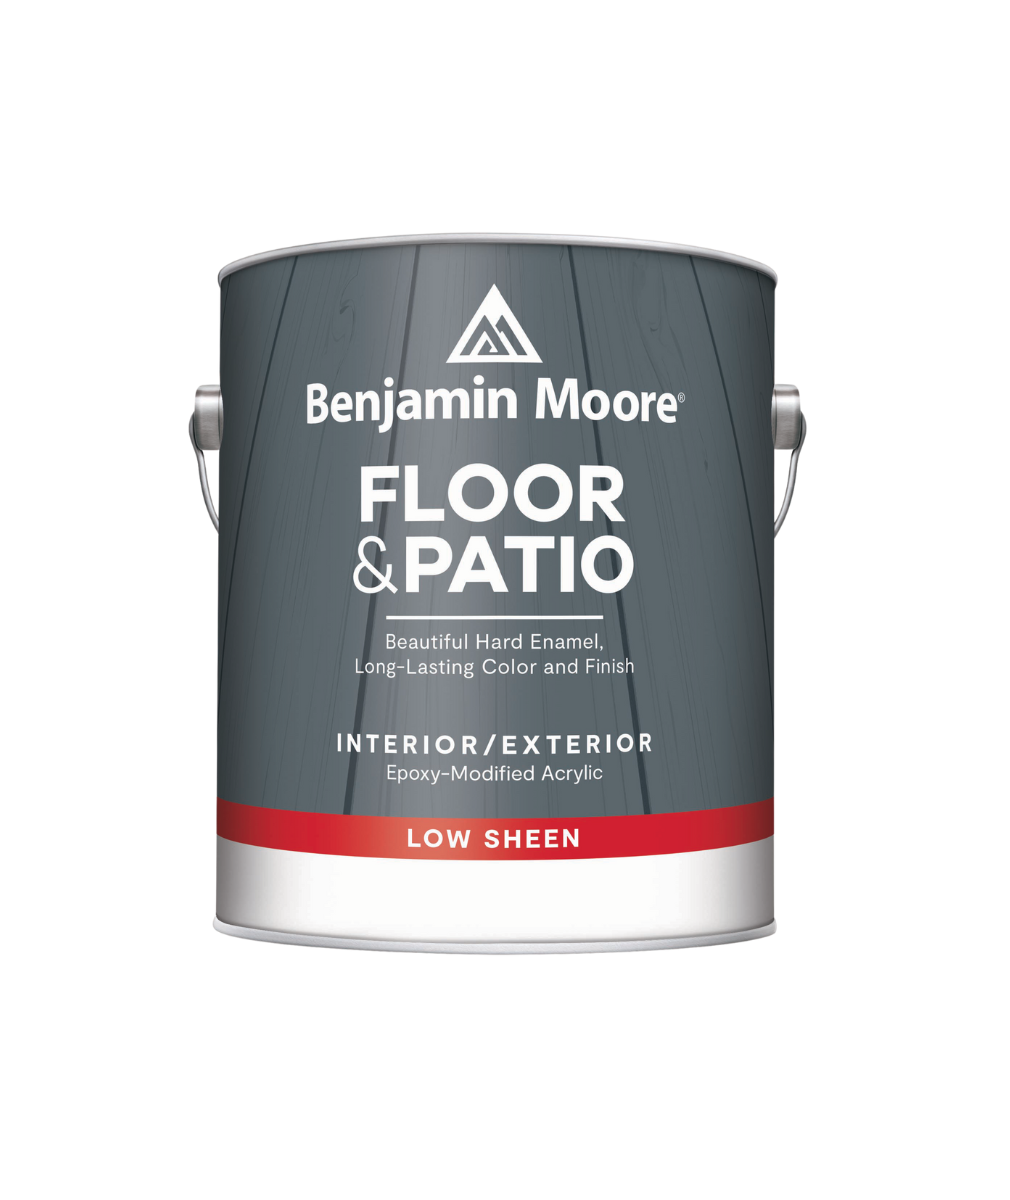 Benjamin Moore floor and patio low sheen Interior Paint available at Clement's Paint.